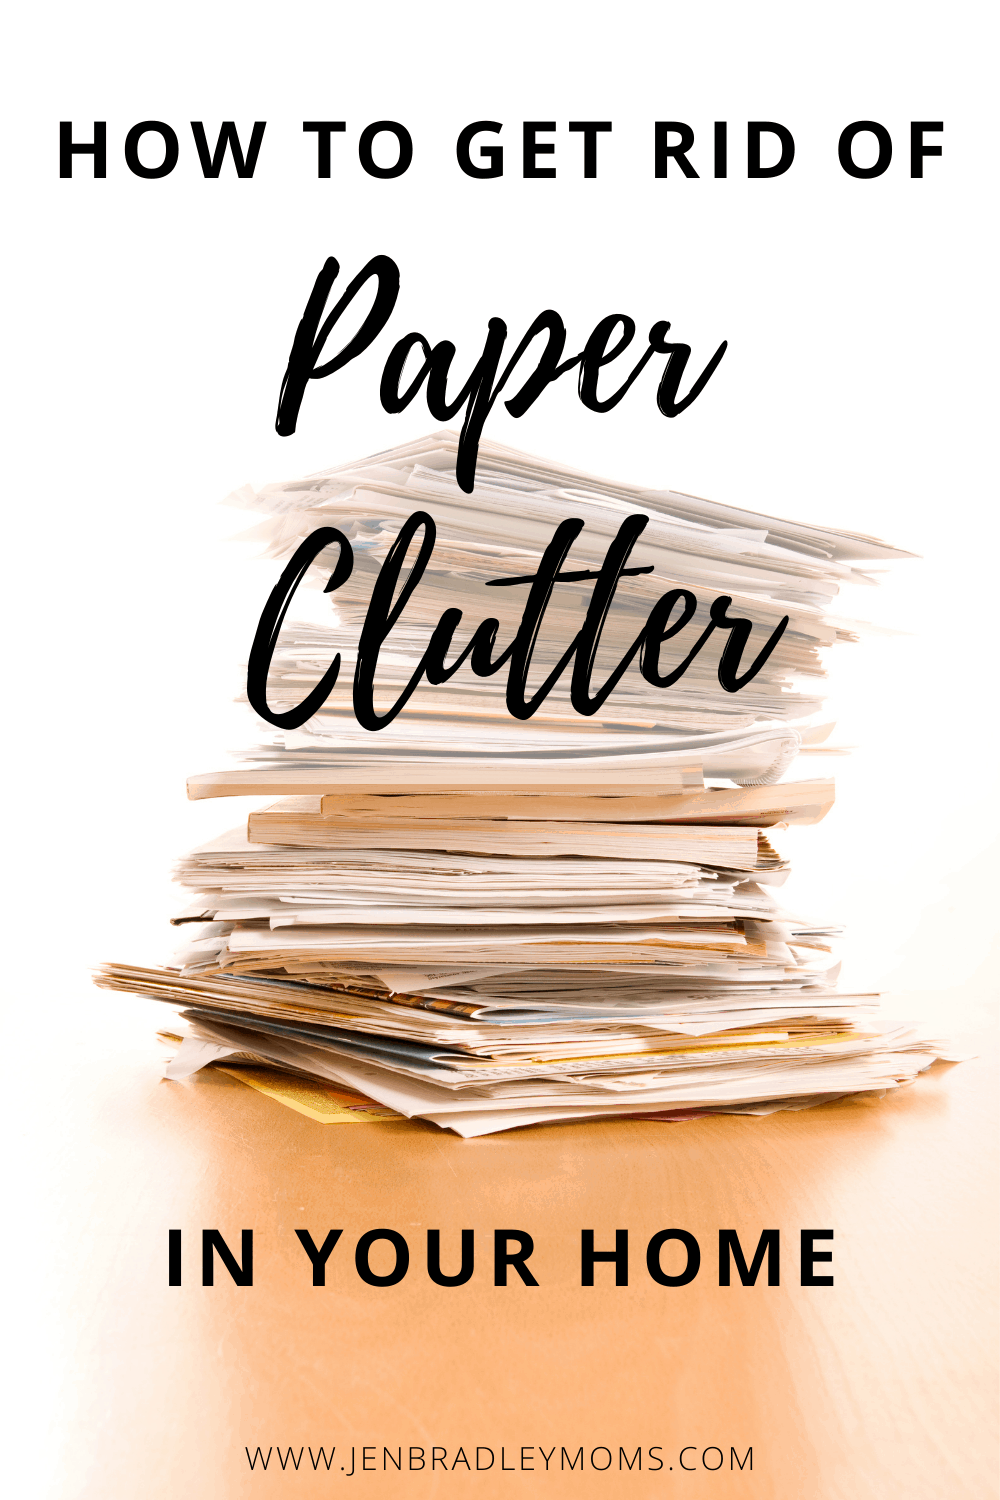 How to Declutter Paper - The Awesome Step-by-Step Guide